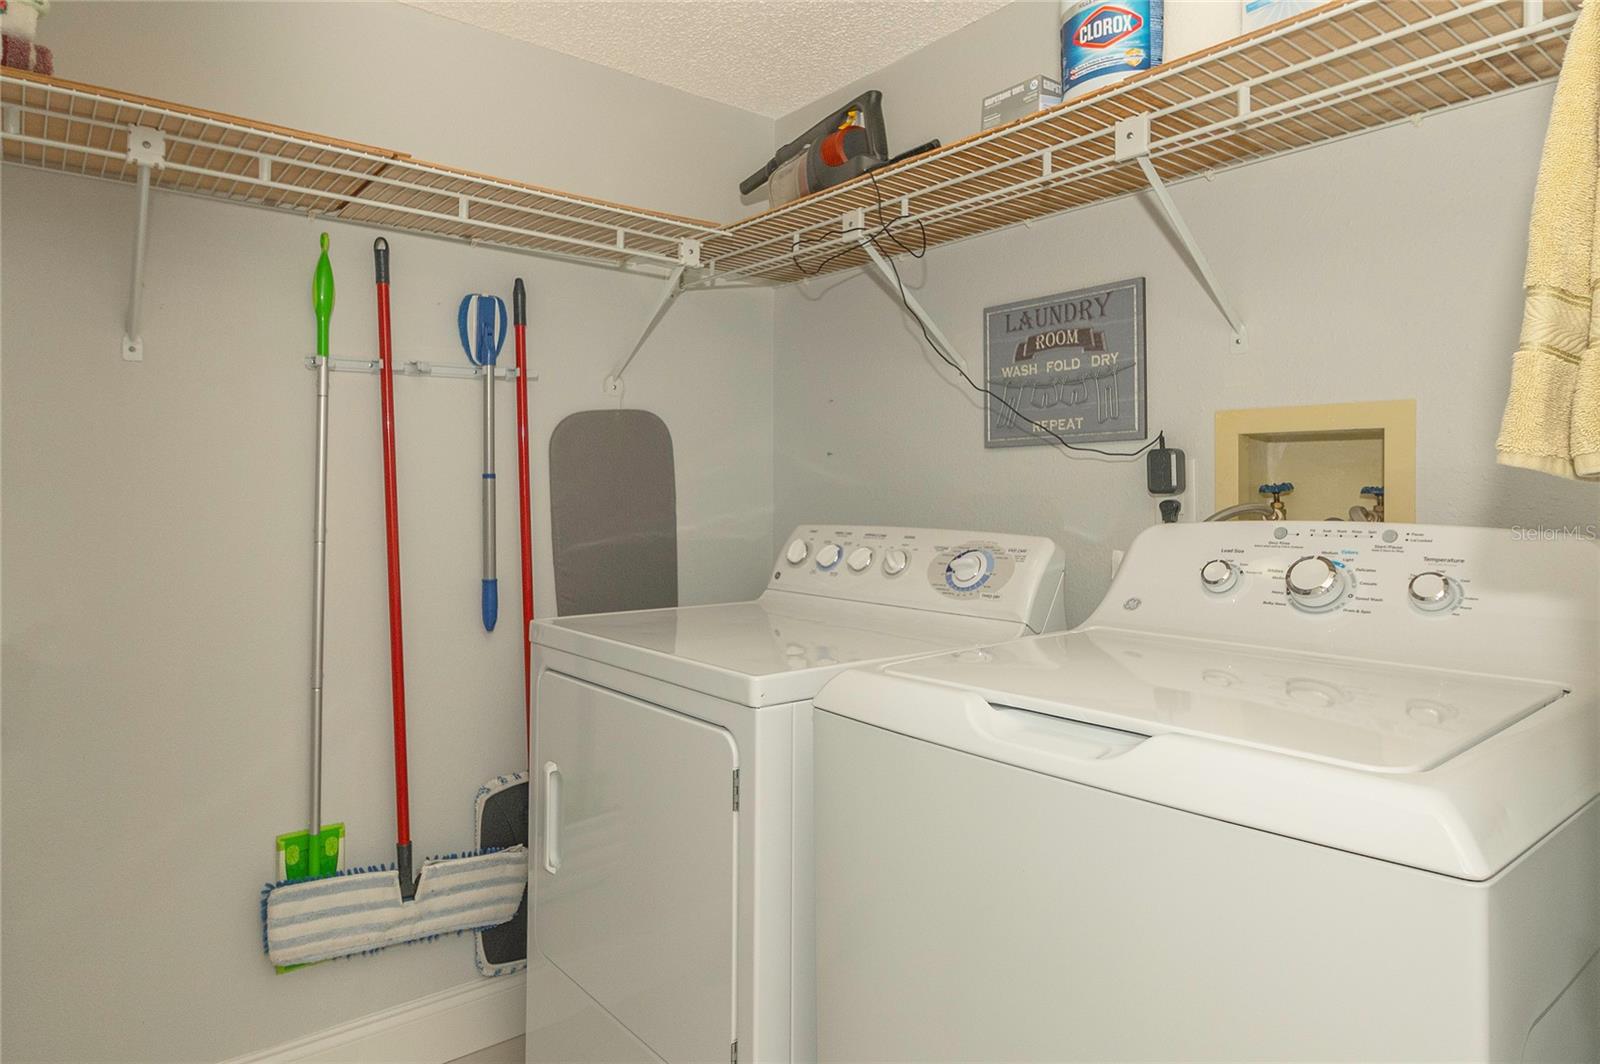 Inside the unit laundry room